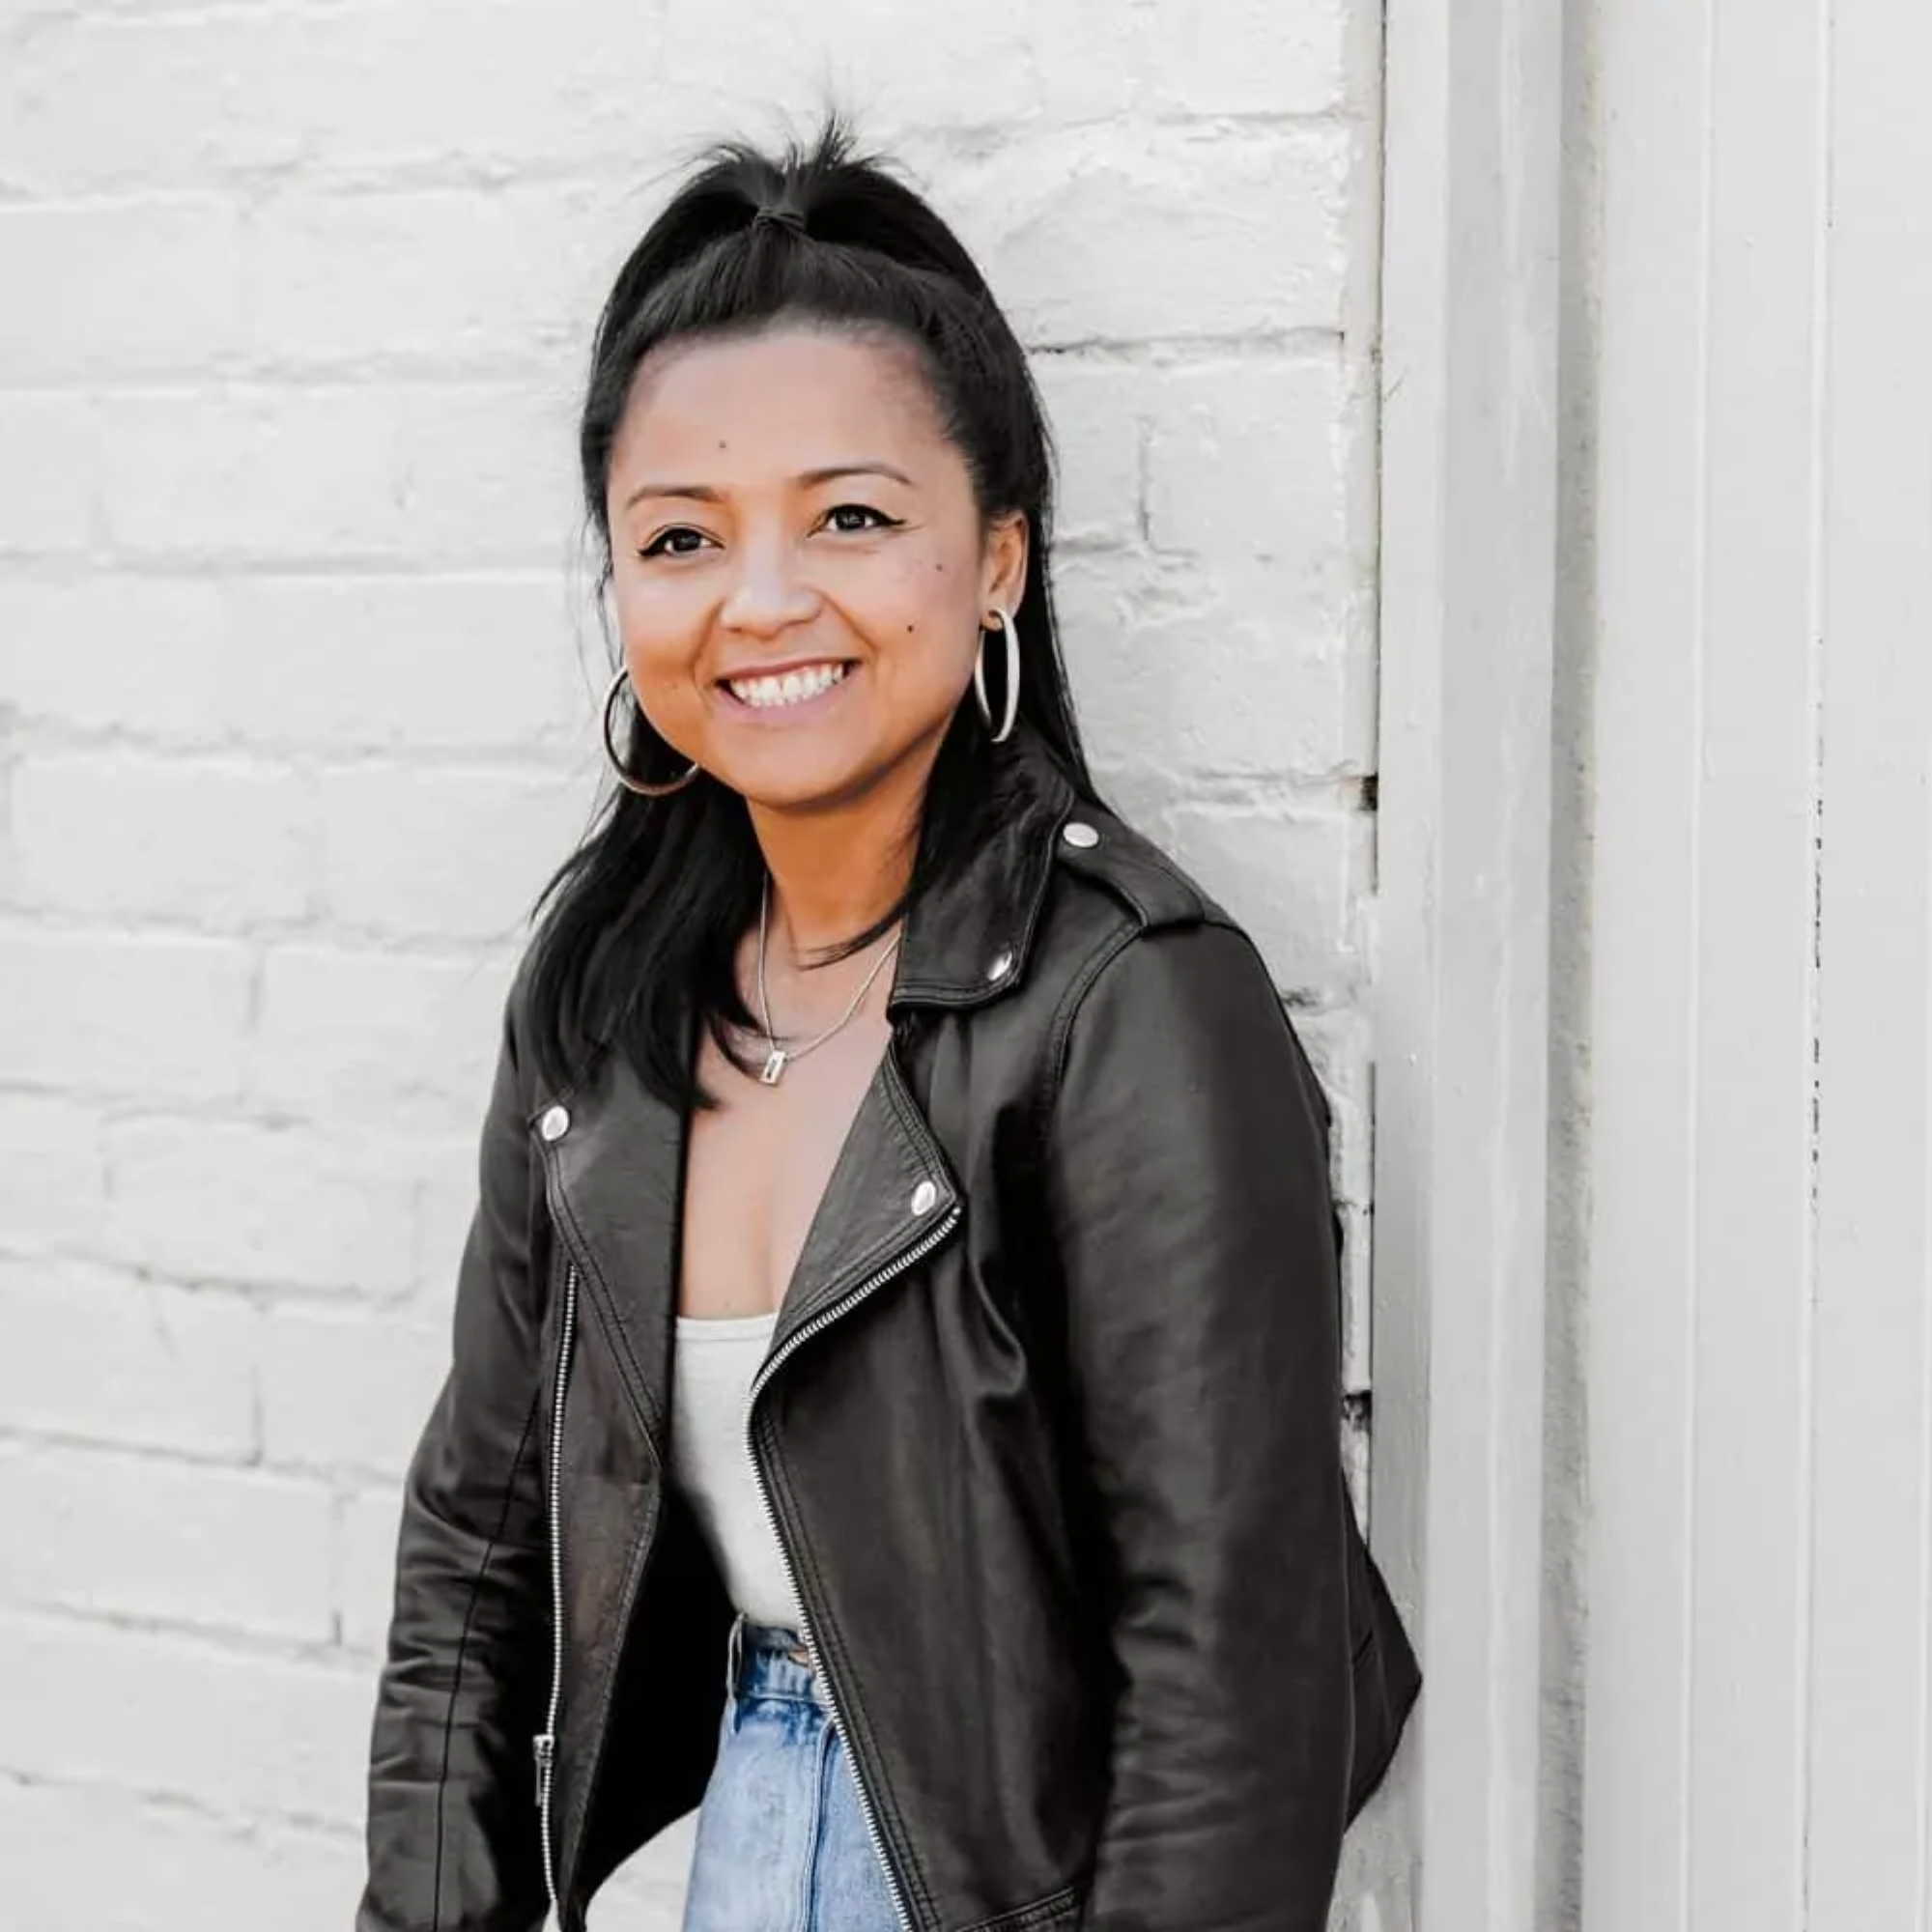 smiling person wearing a black leather jacket and blue jeans leans against a white wall